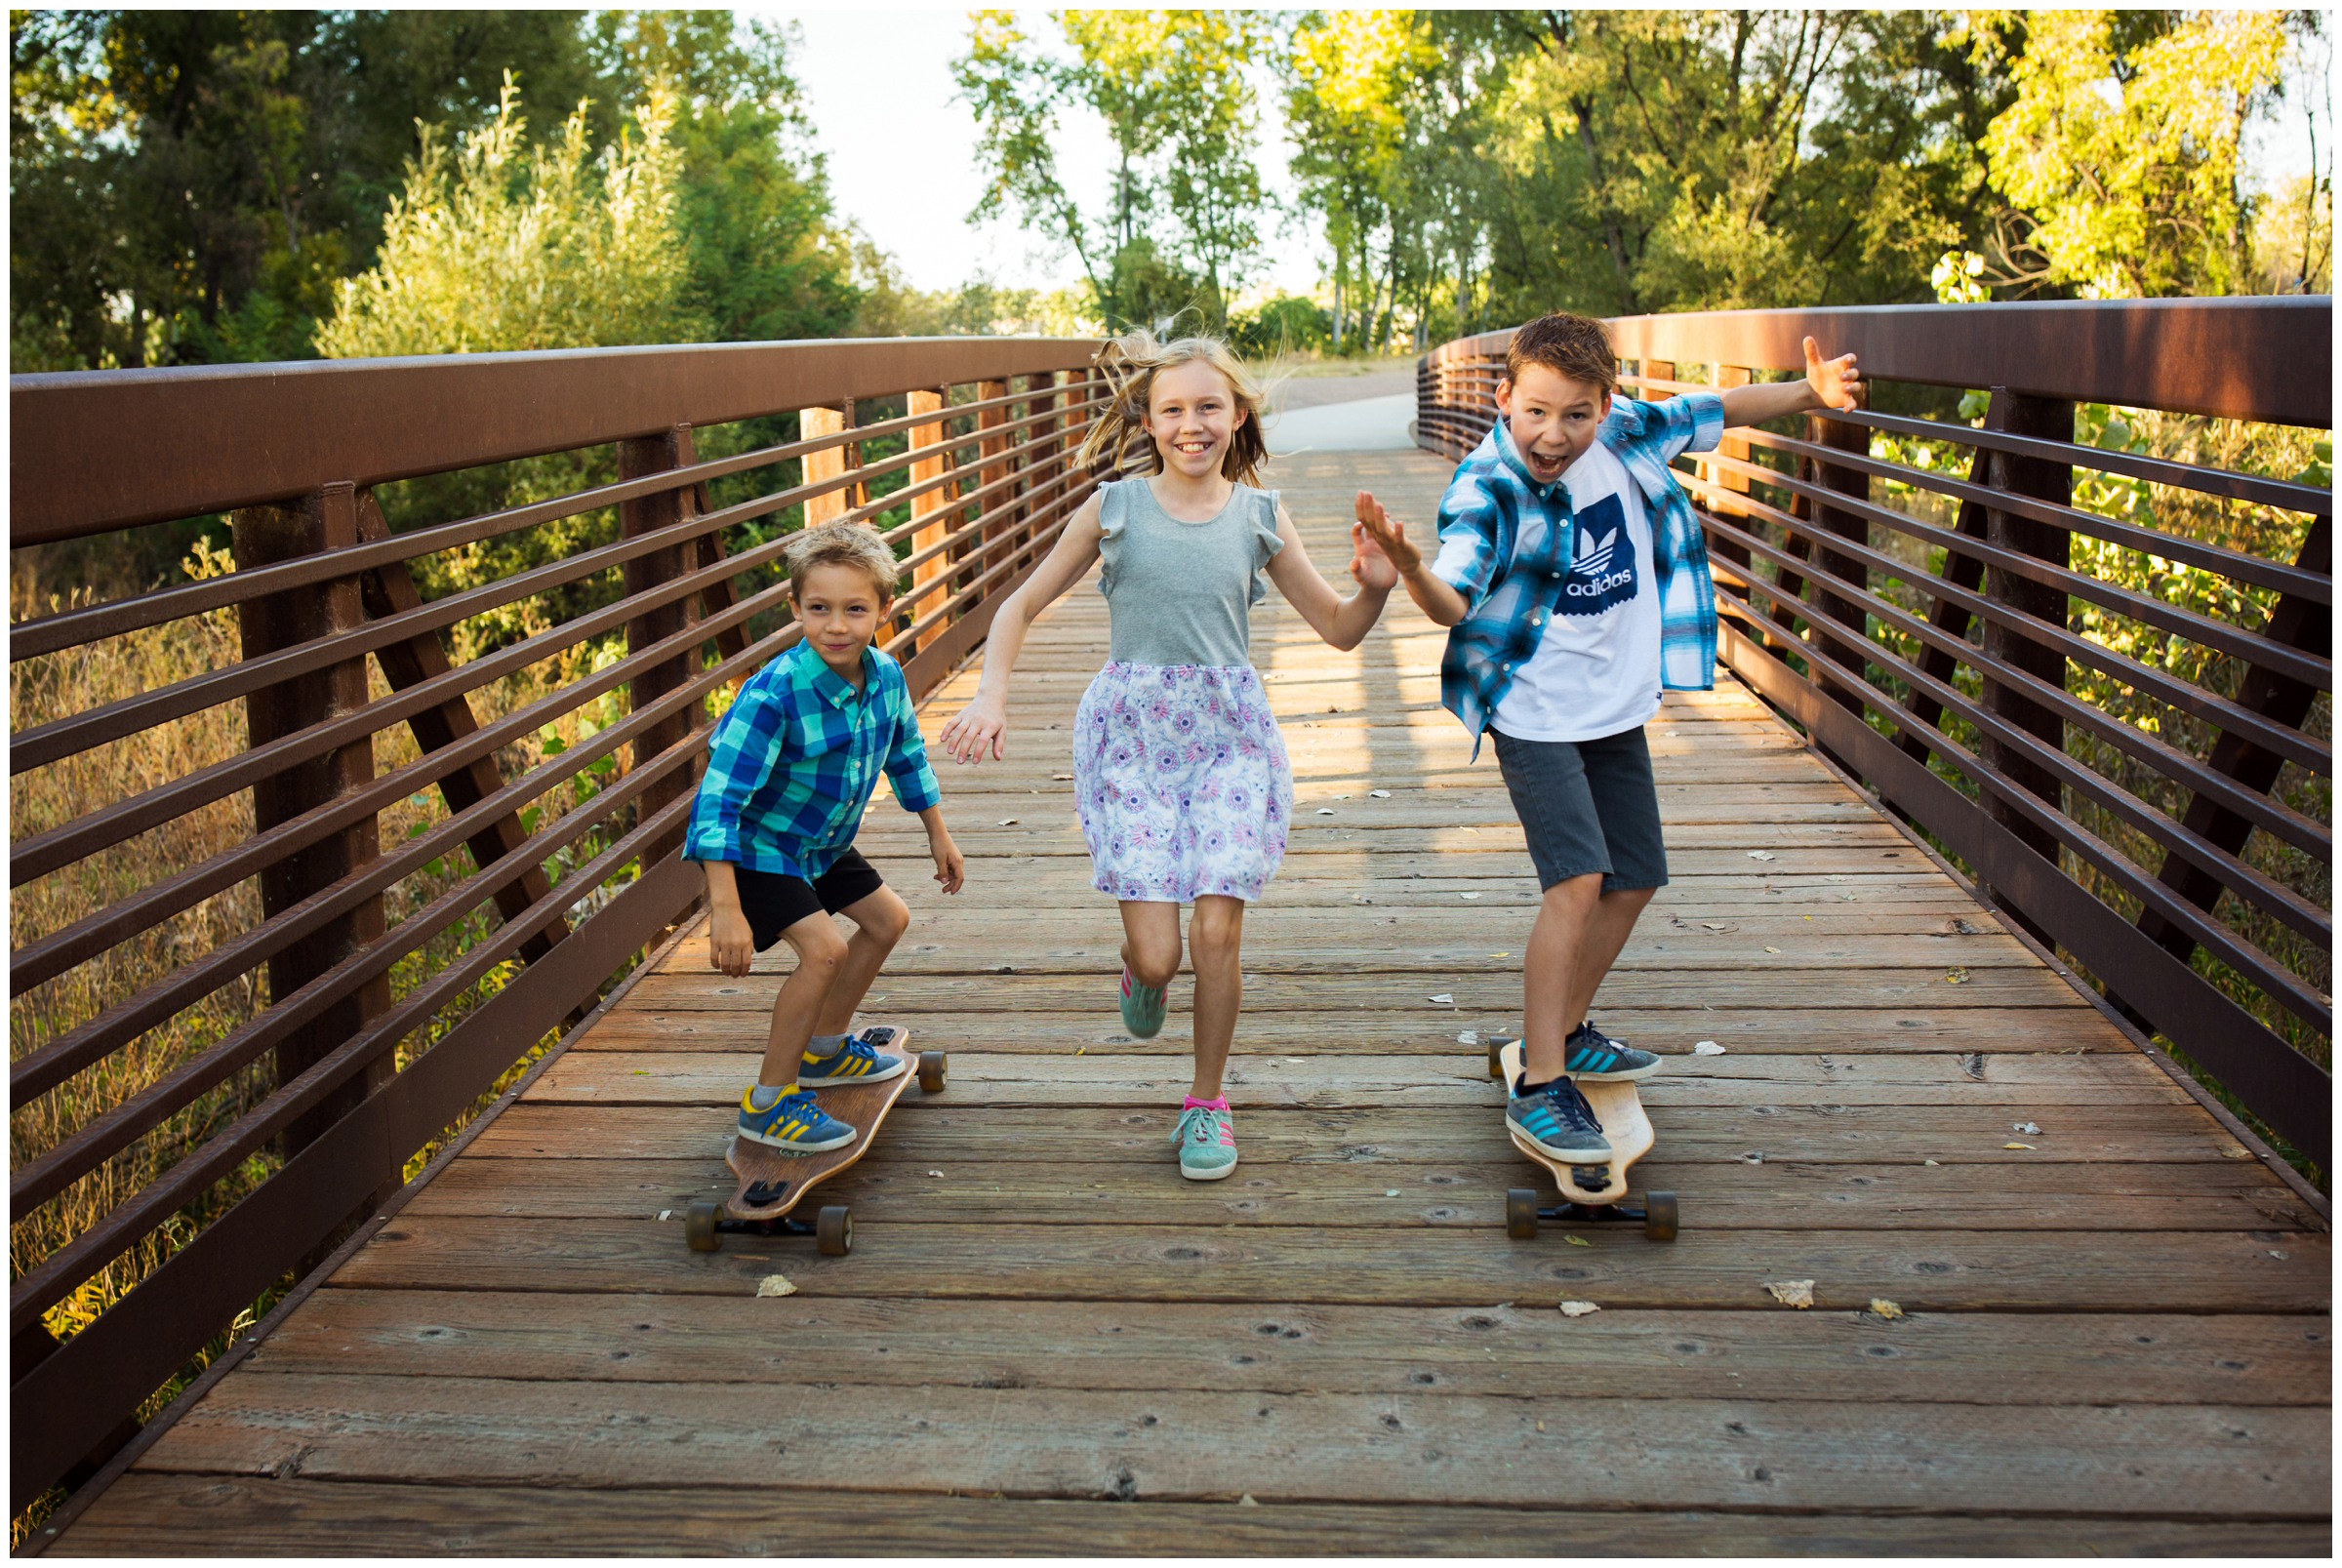 skate boarding Colorado family photos by Longmont child photographer Plum Pretty Photography at Golden Ponds